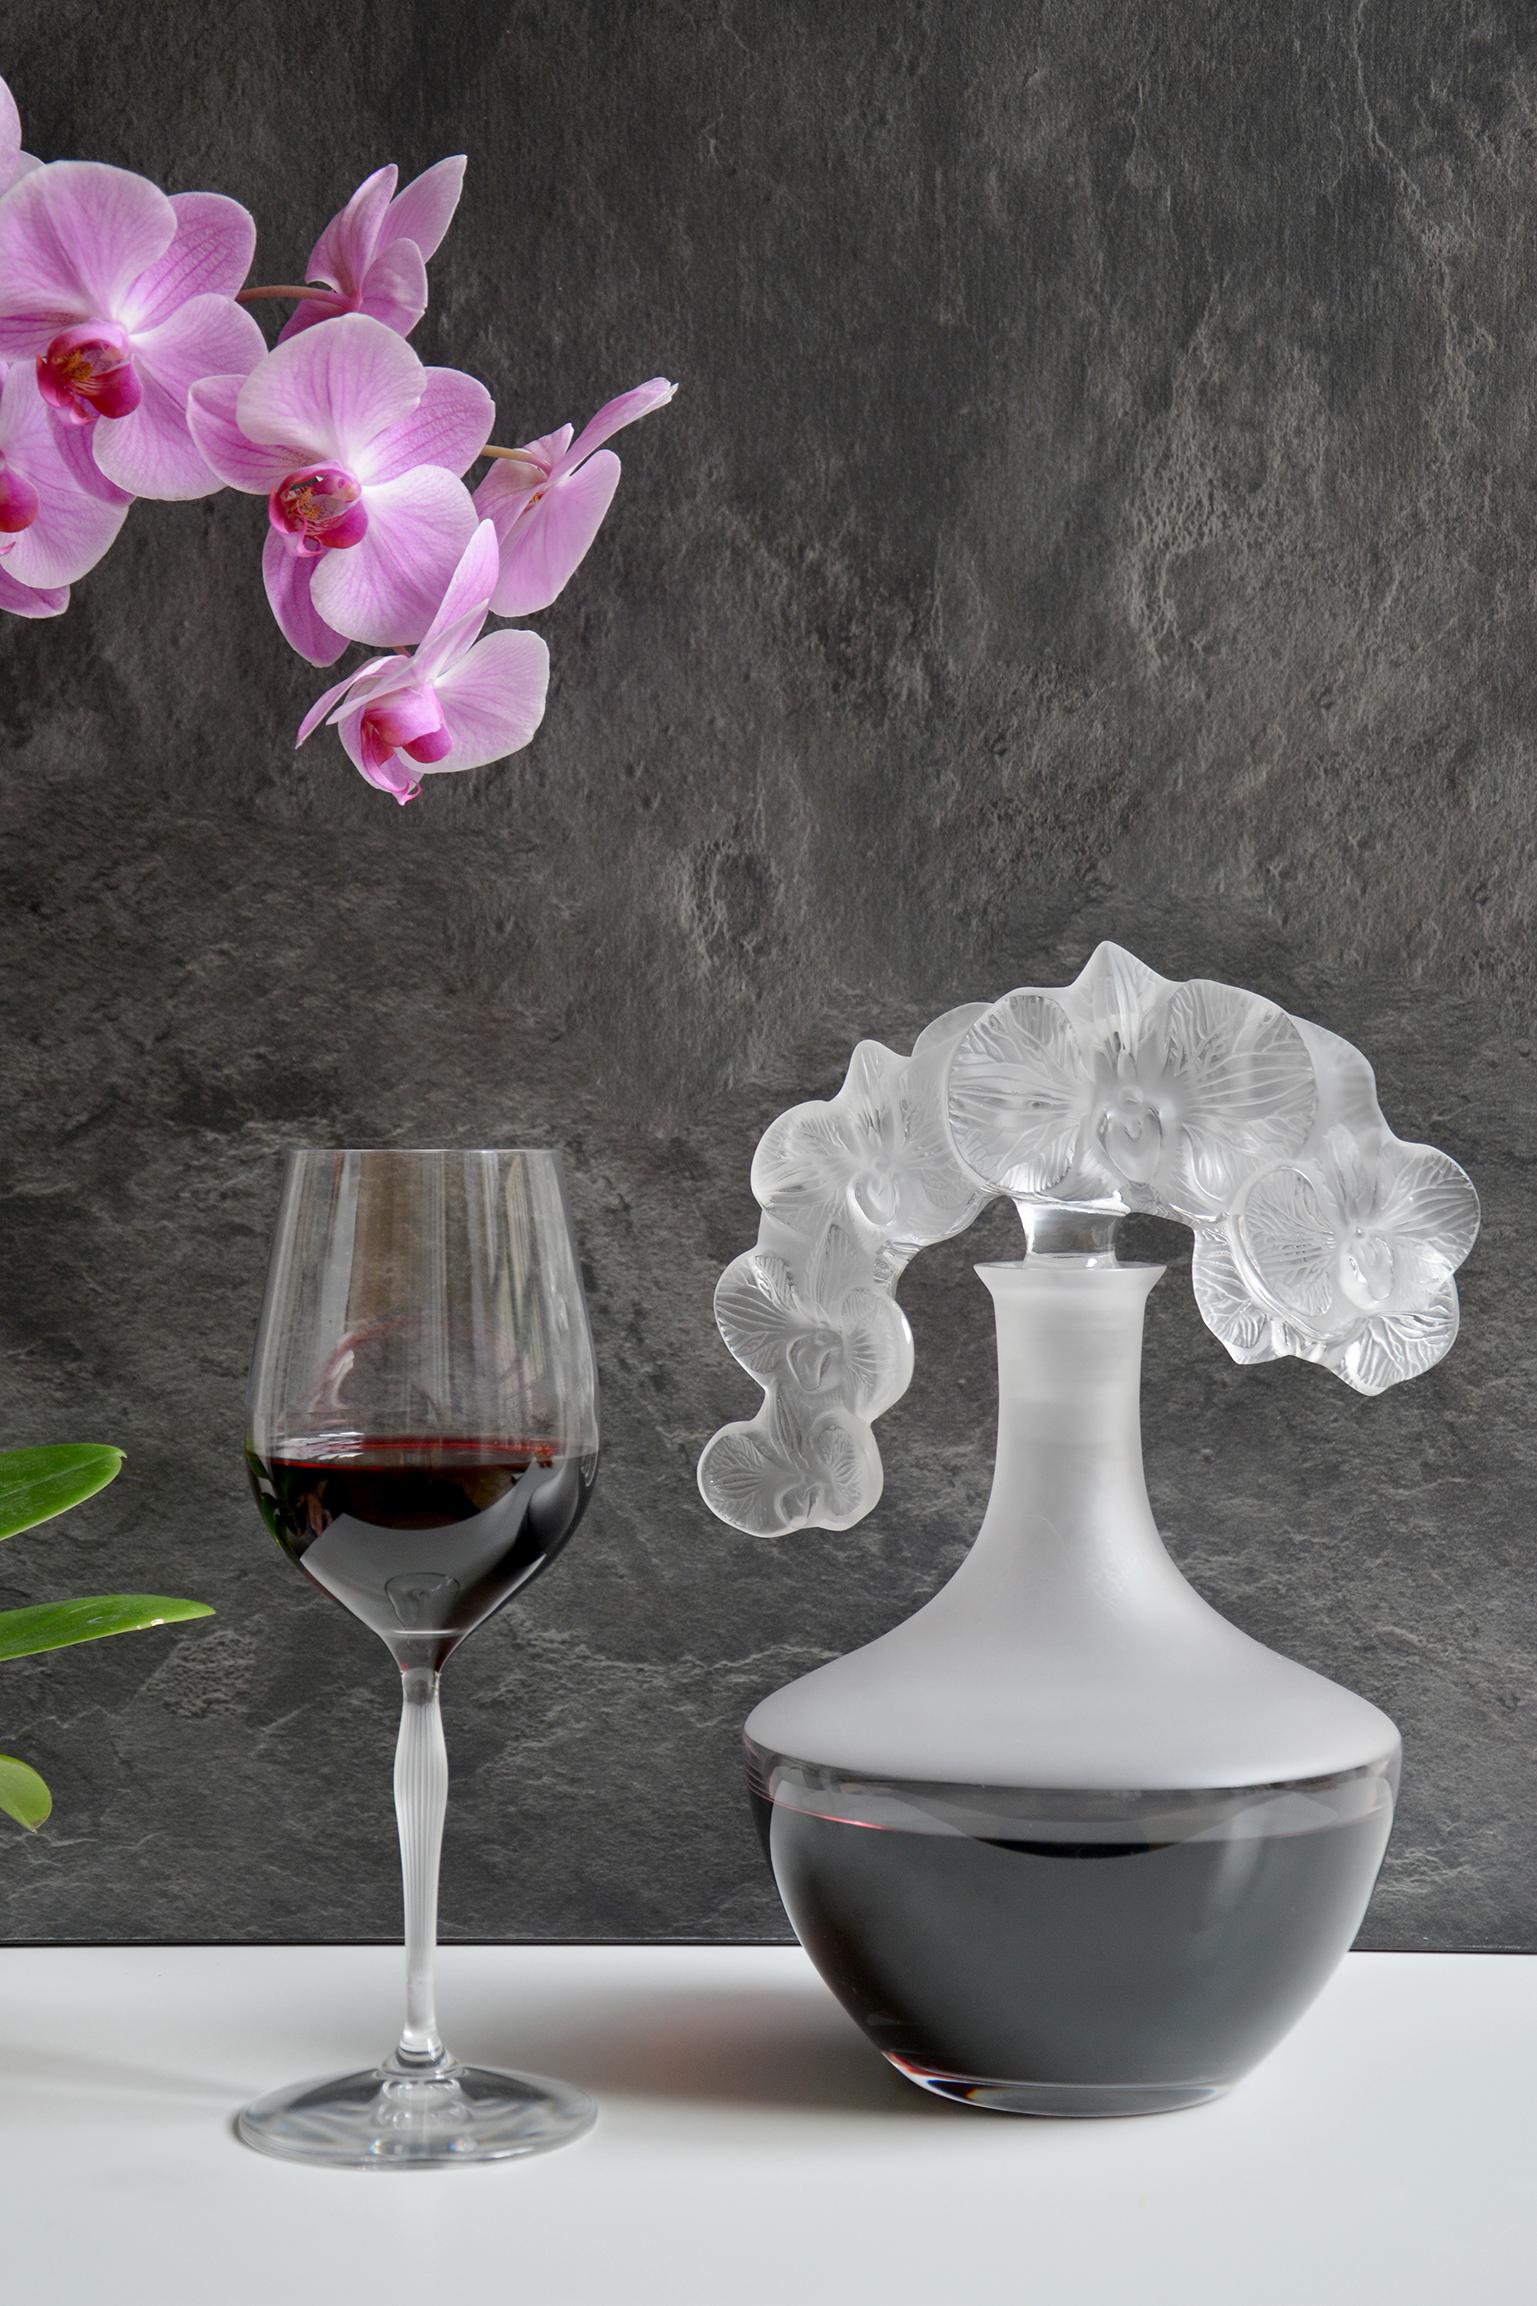 Designed to highlight the flavors of the finest spirits, the Orchidée decanter enriches the Lalique collection of decanters to satisfy the desires of connoisseurs and discerning collectors. Highlighted by satin-finished crystal, orchid flowers,